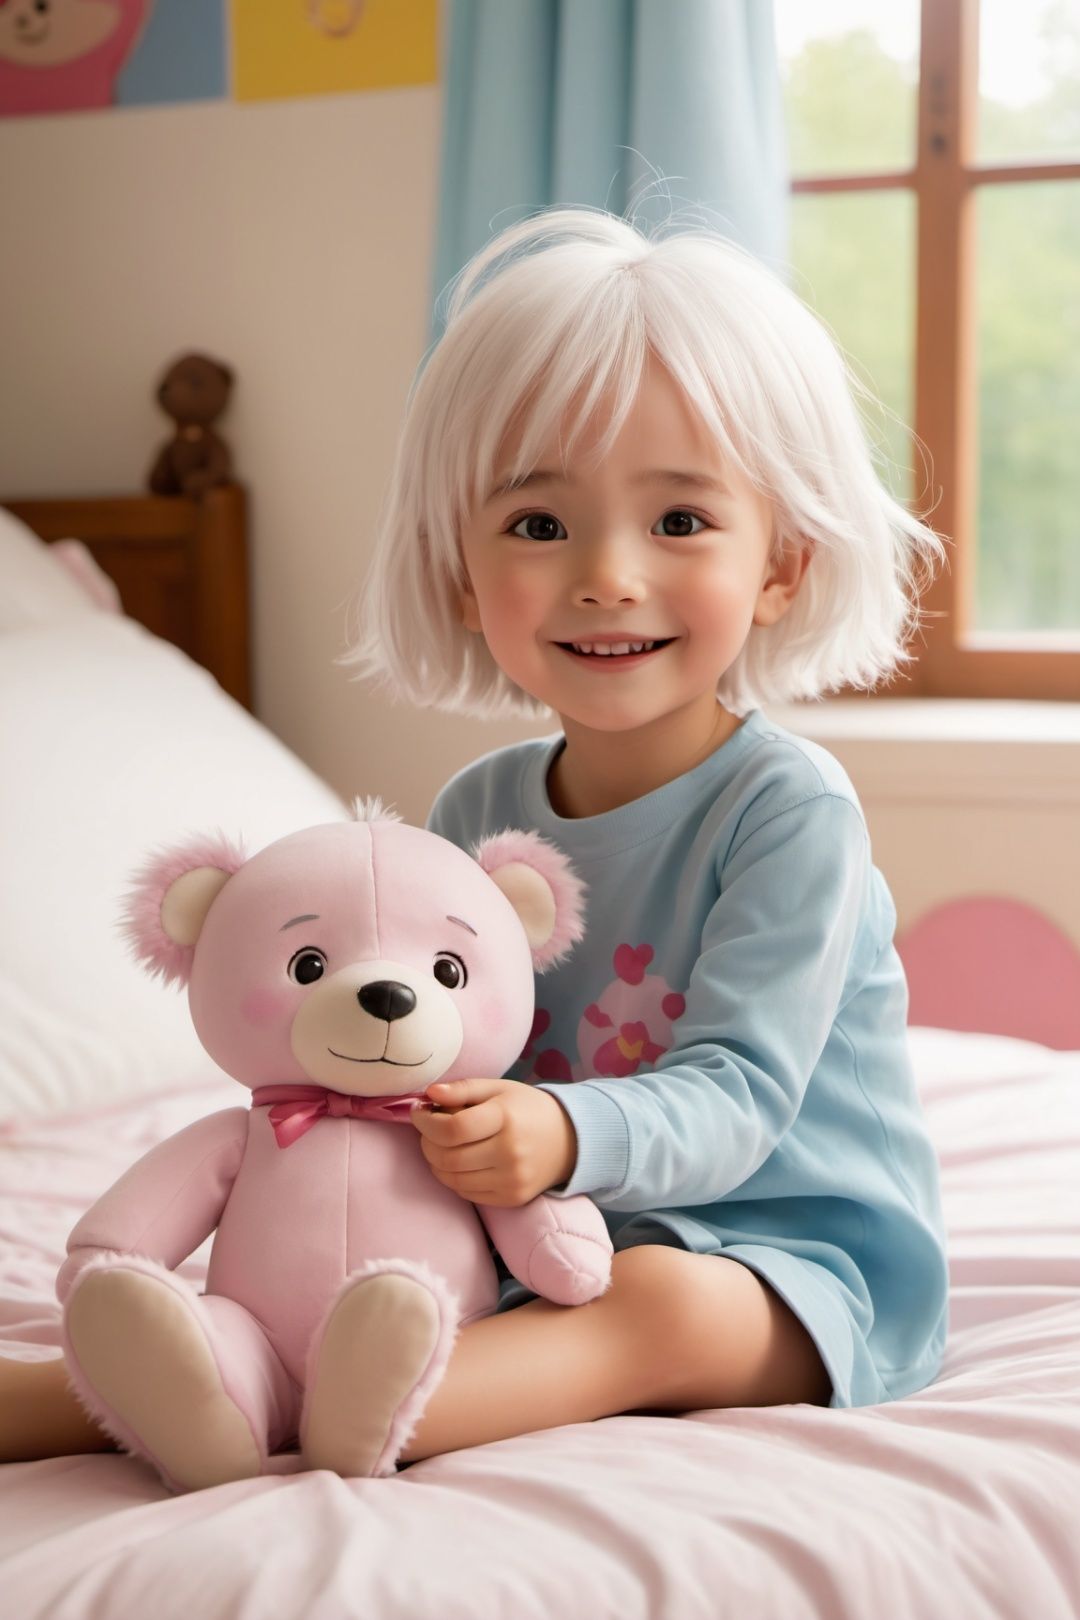 Ghibli artwork, 1 Little girl, white hair, short hair, deep eyes, pink pupils, open arms, smile, indoor, cartoon style bedroom, sitting on bed, bear doll, messy toy, soft background,

